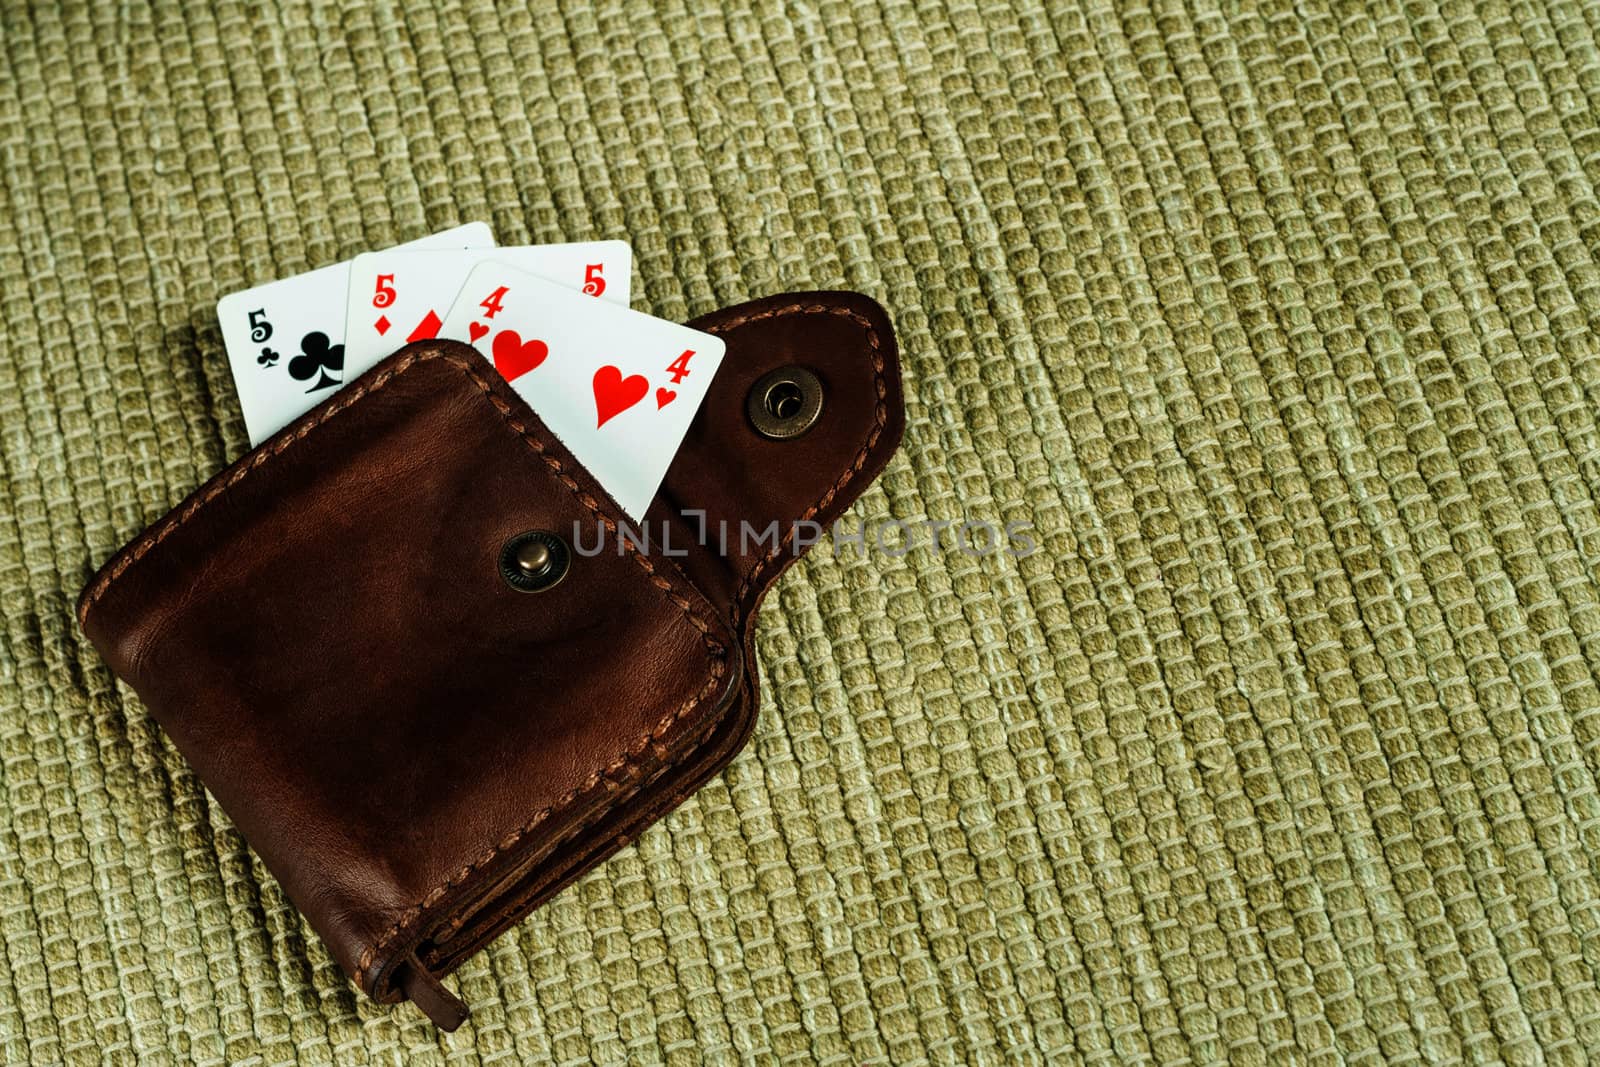 Purse made of leather and playing cards in high resolution